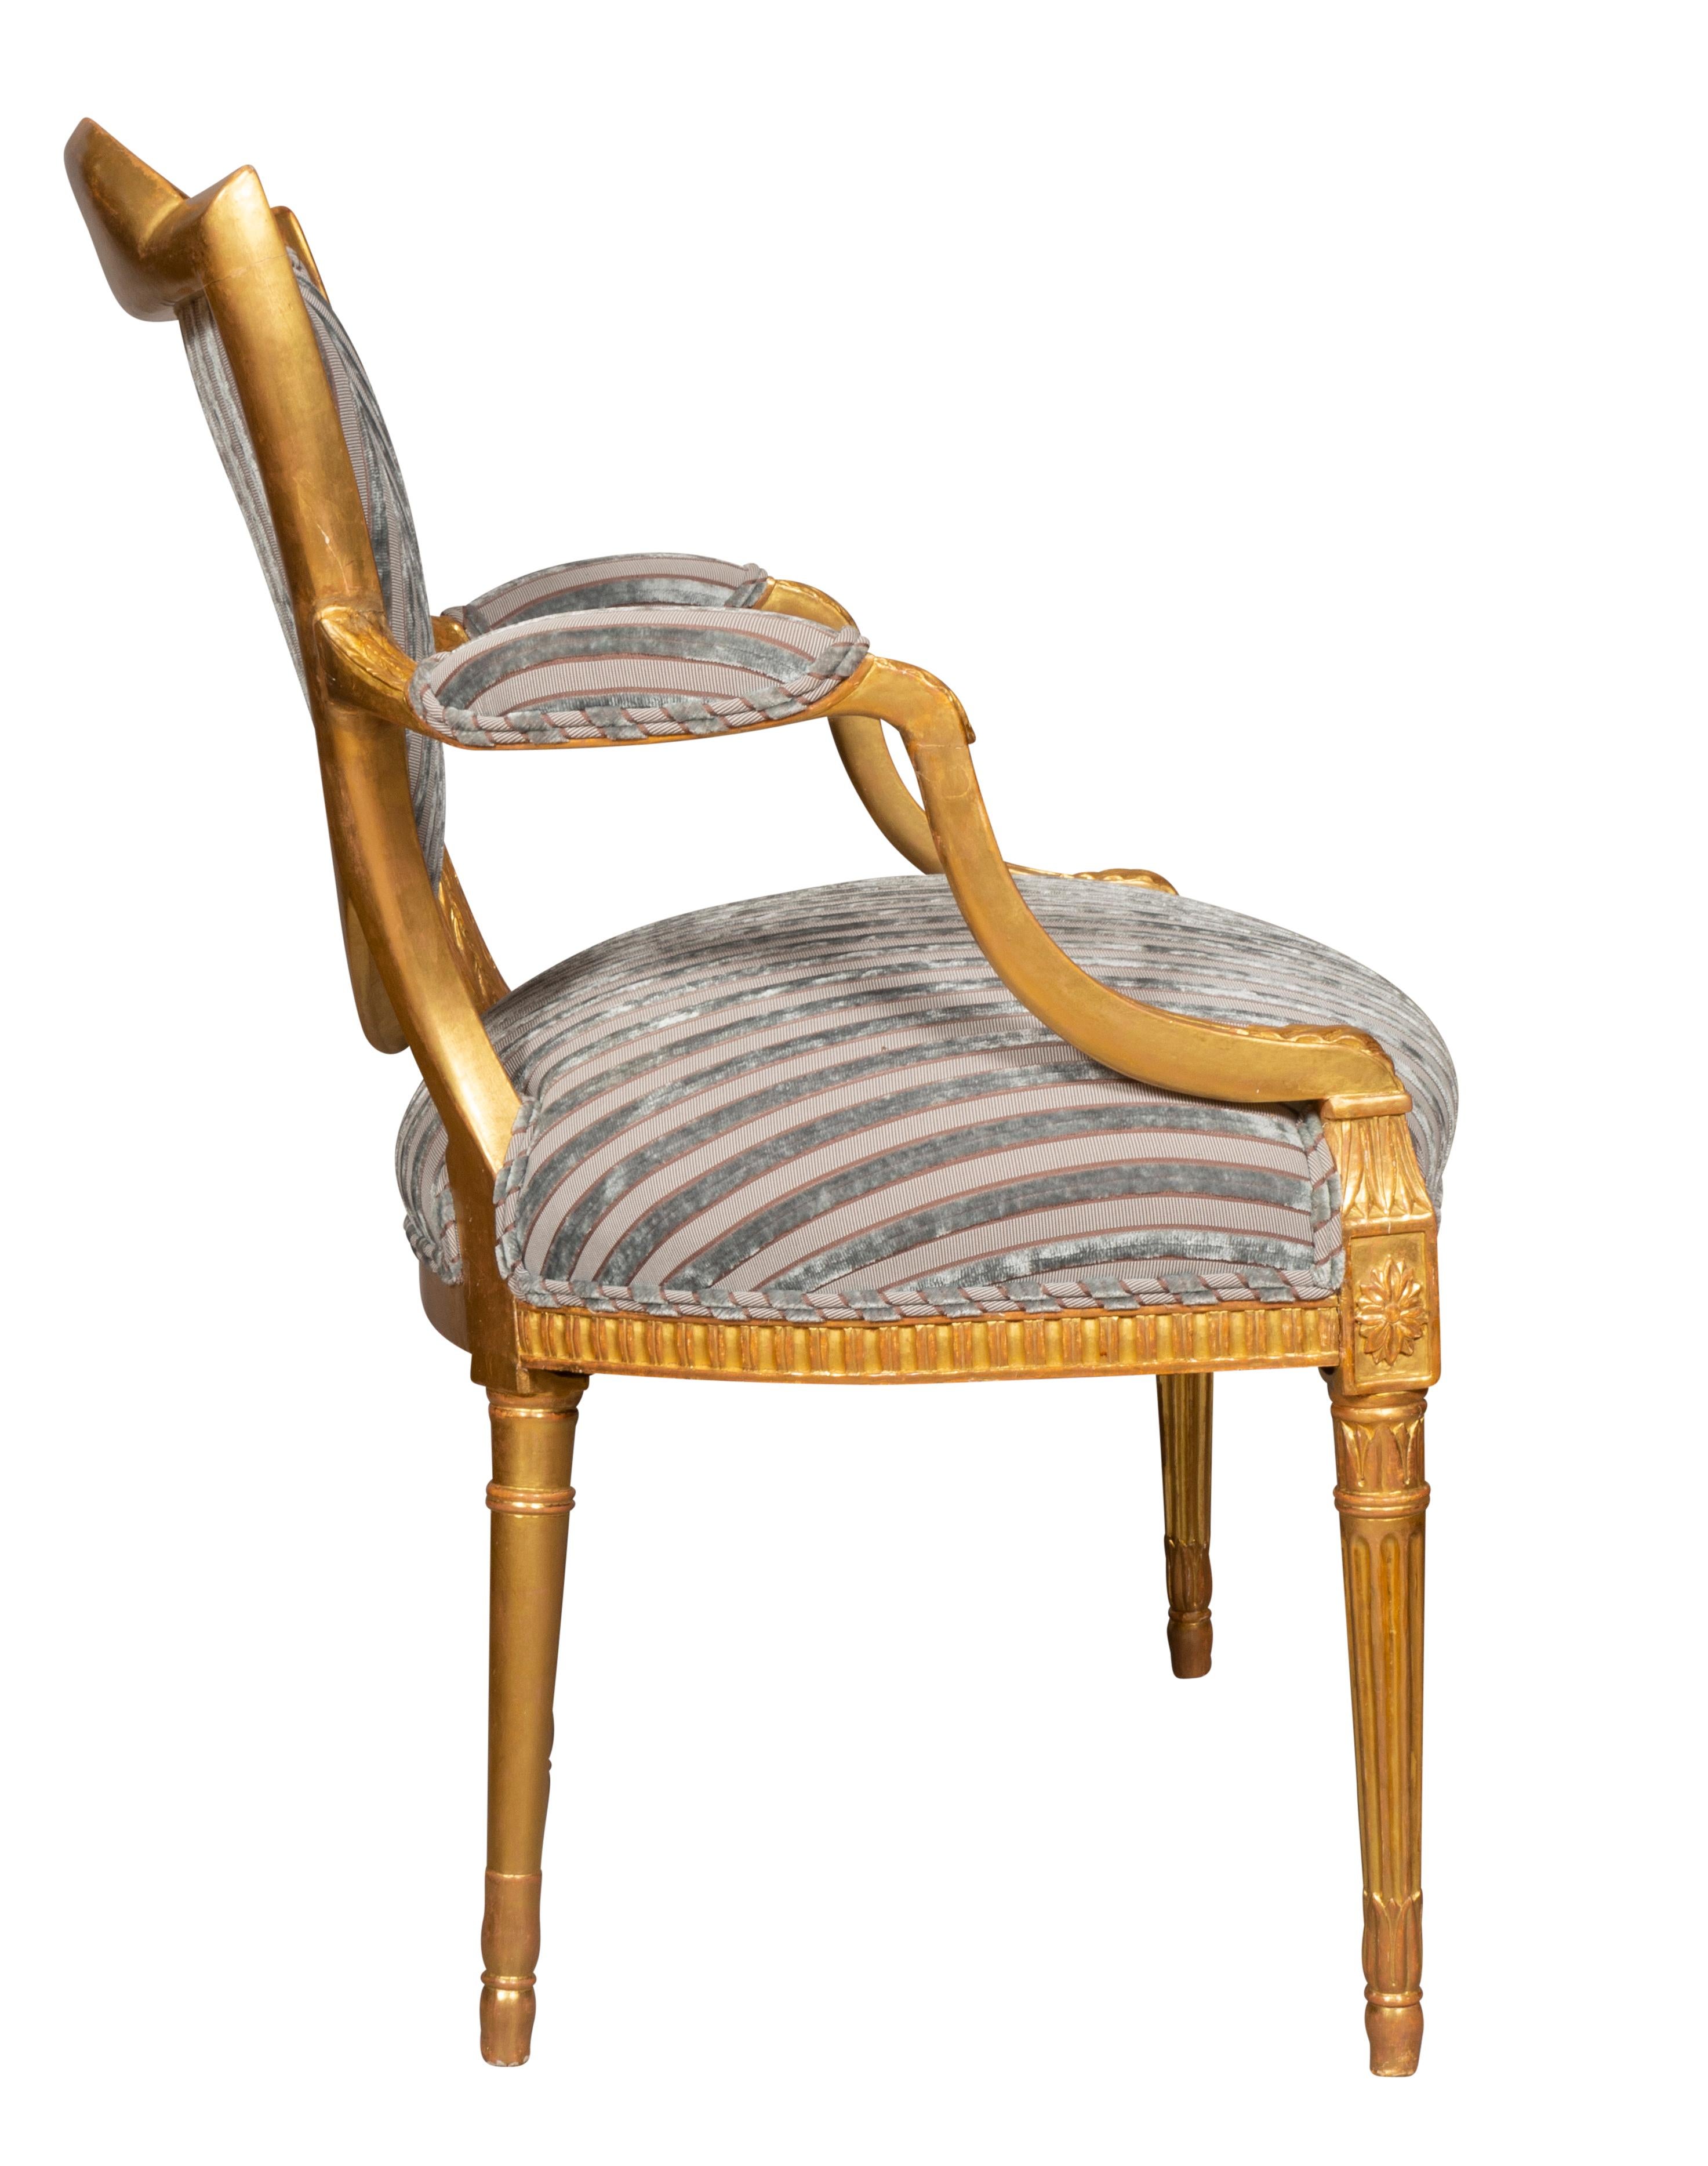 Late 18th Century Pair of George III Giltwood Armchairs For Sale